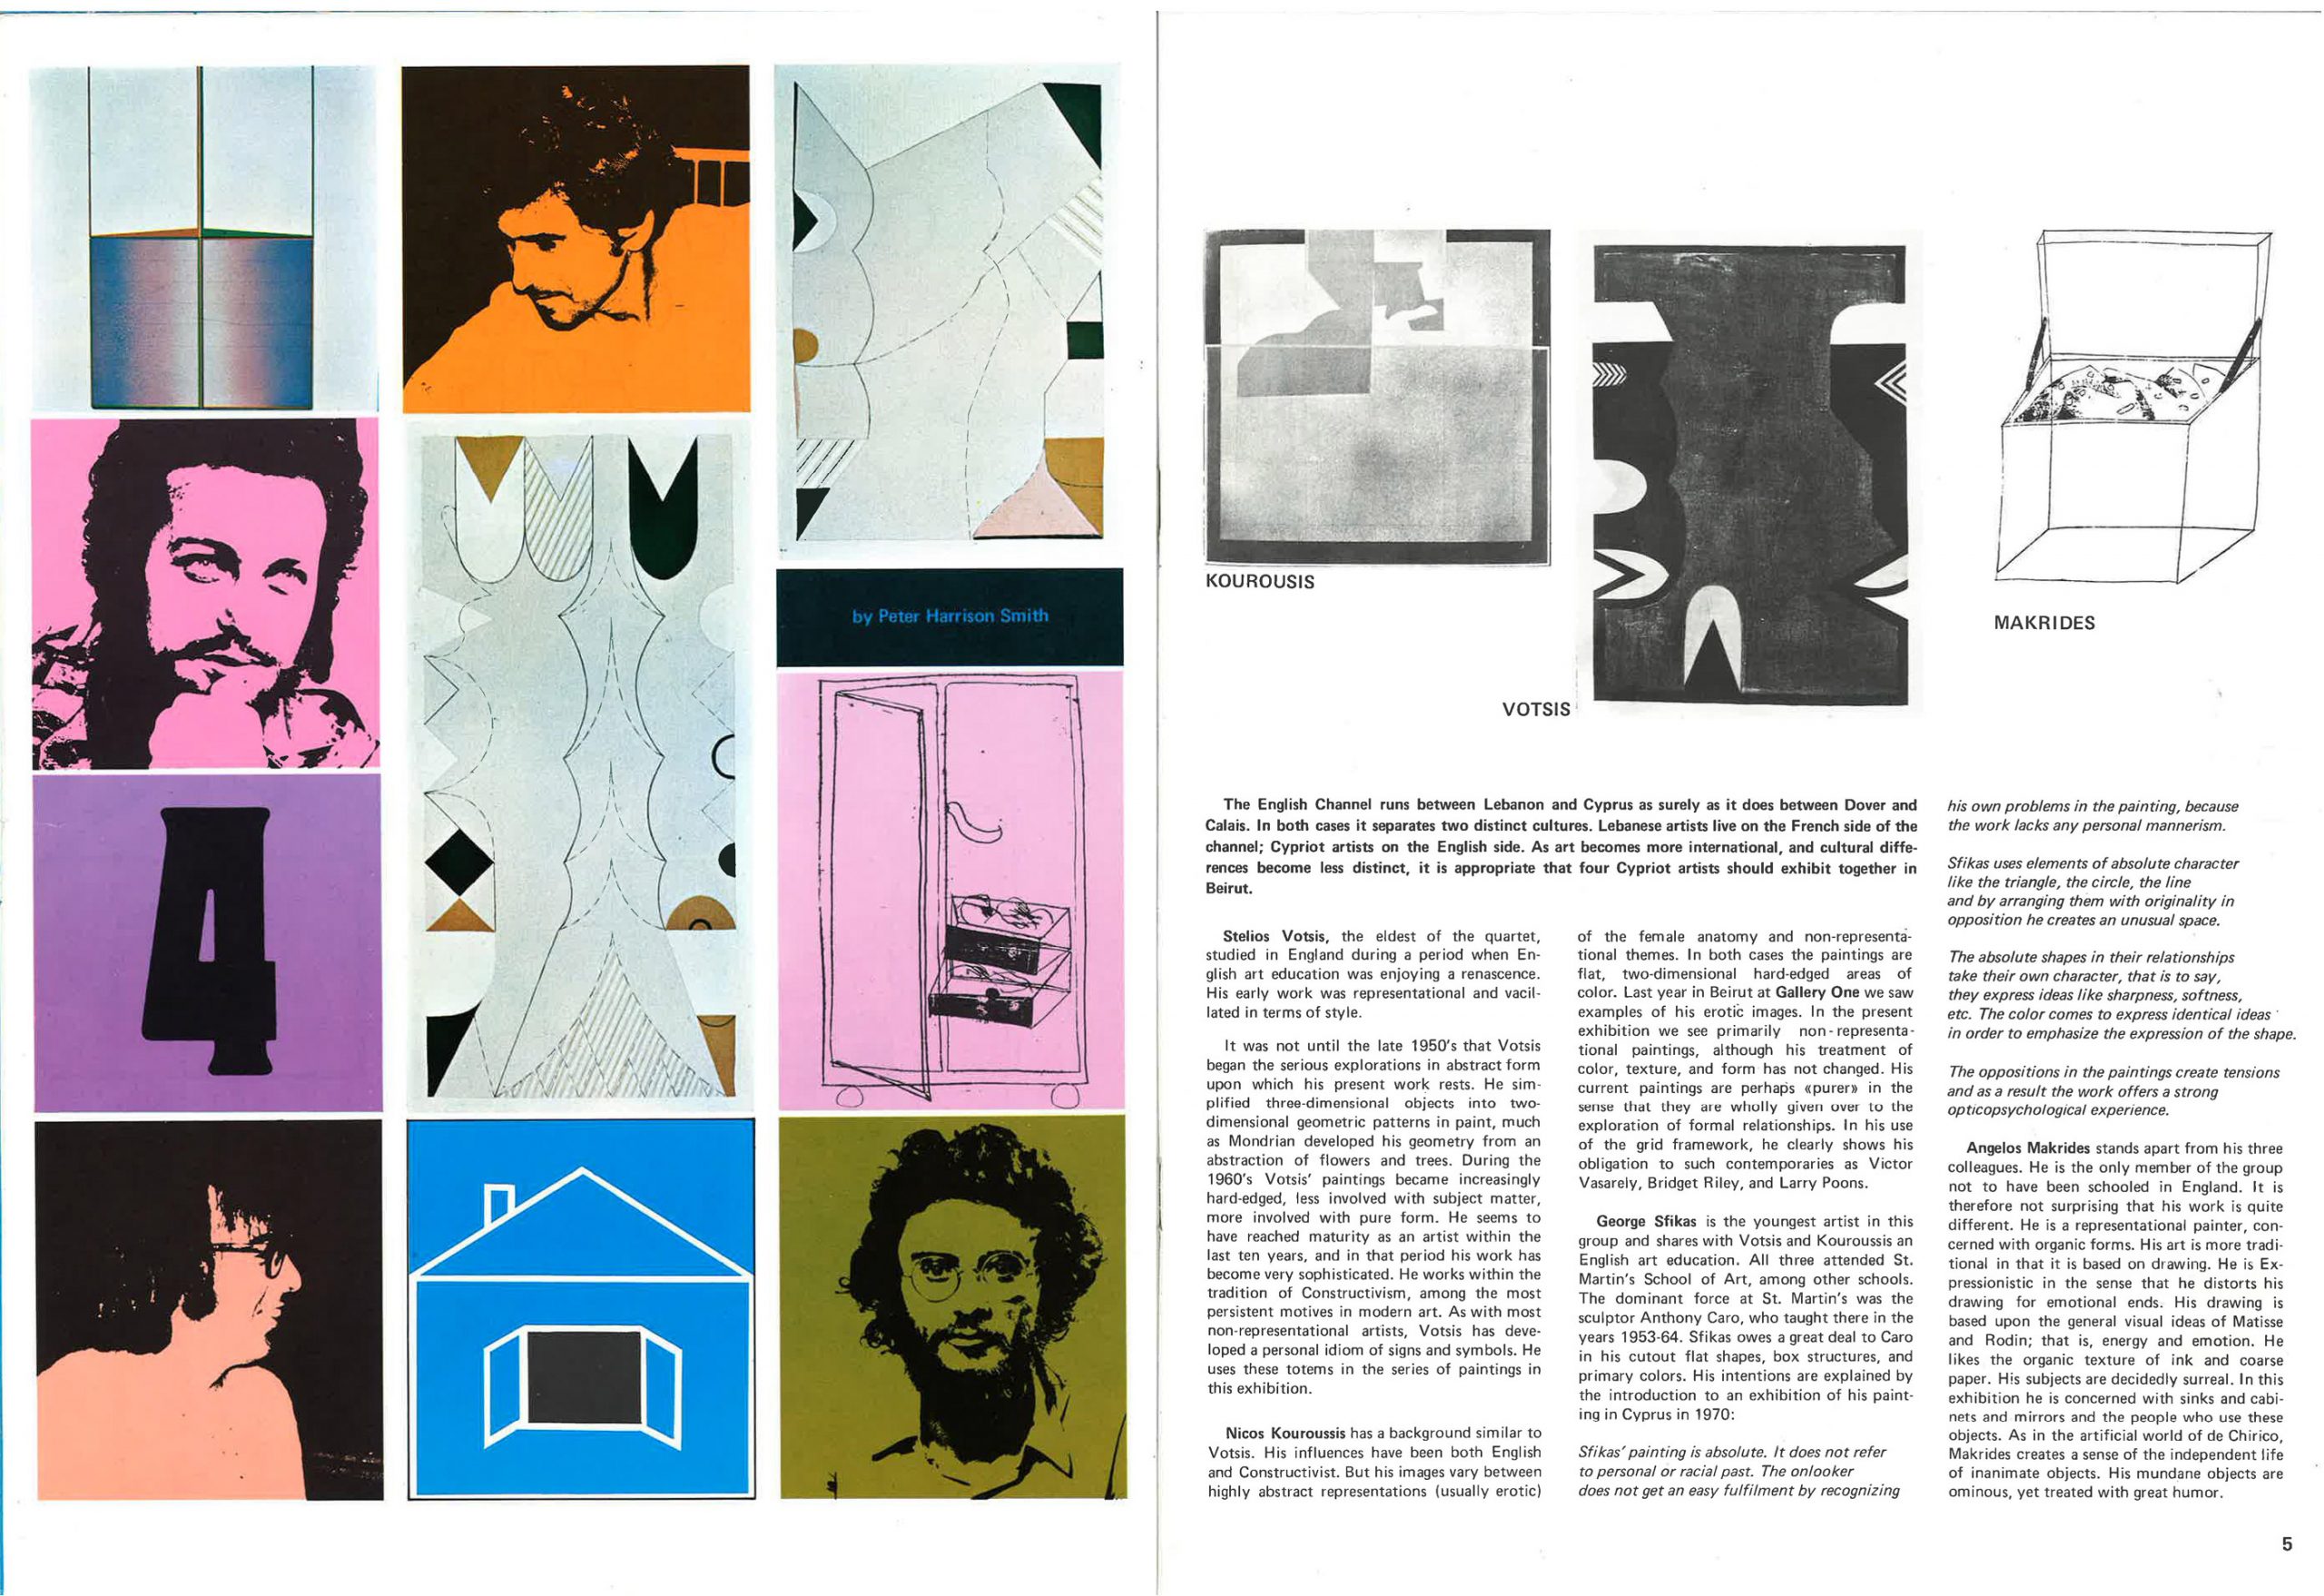 Magazine/review, Four Contemporary Cypriot Artists Exhibition at Contact Art Gallery, 28 September 1972, published by Contact Art Gallery (4-5). Courtesy Waddah Faris